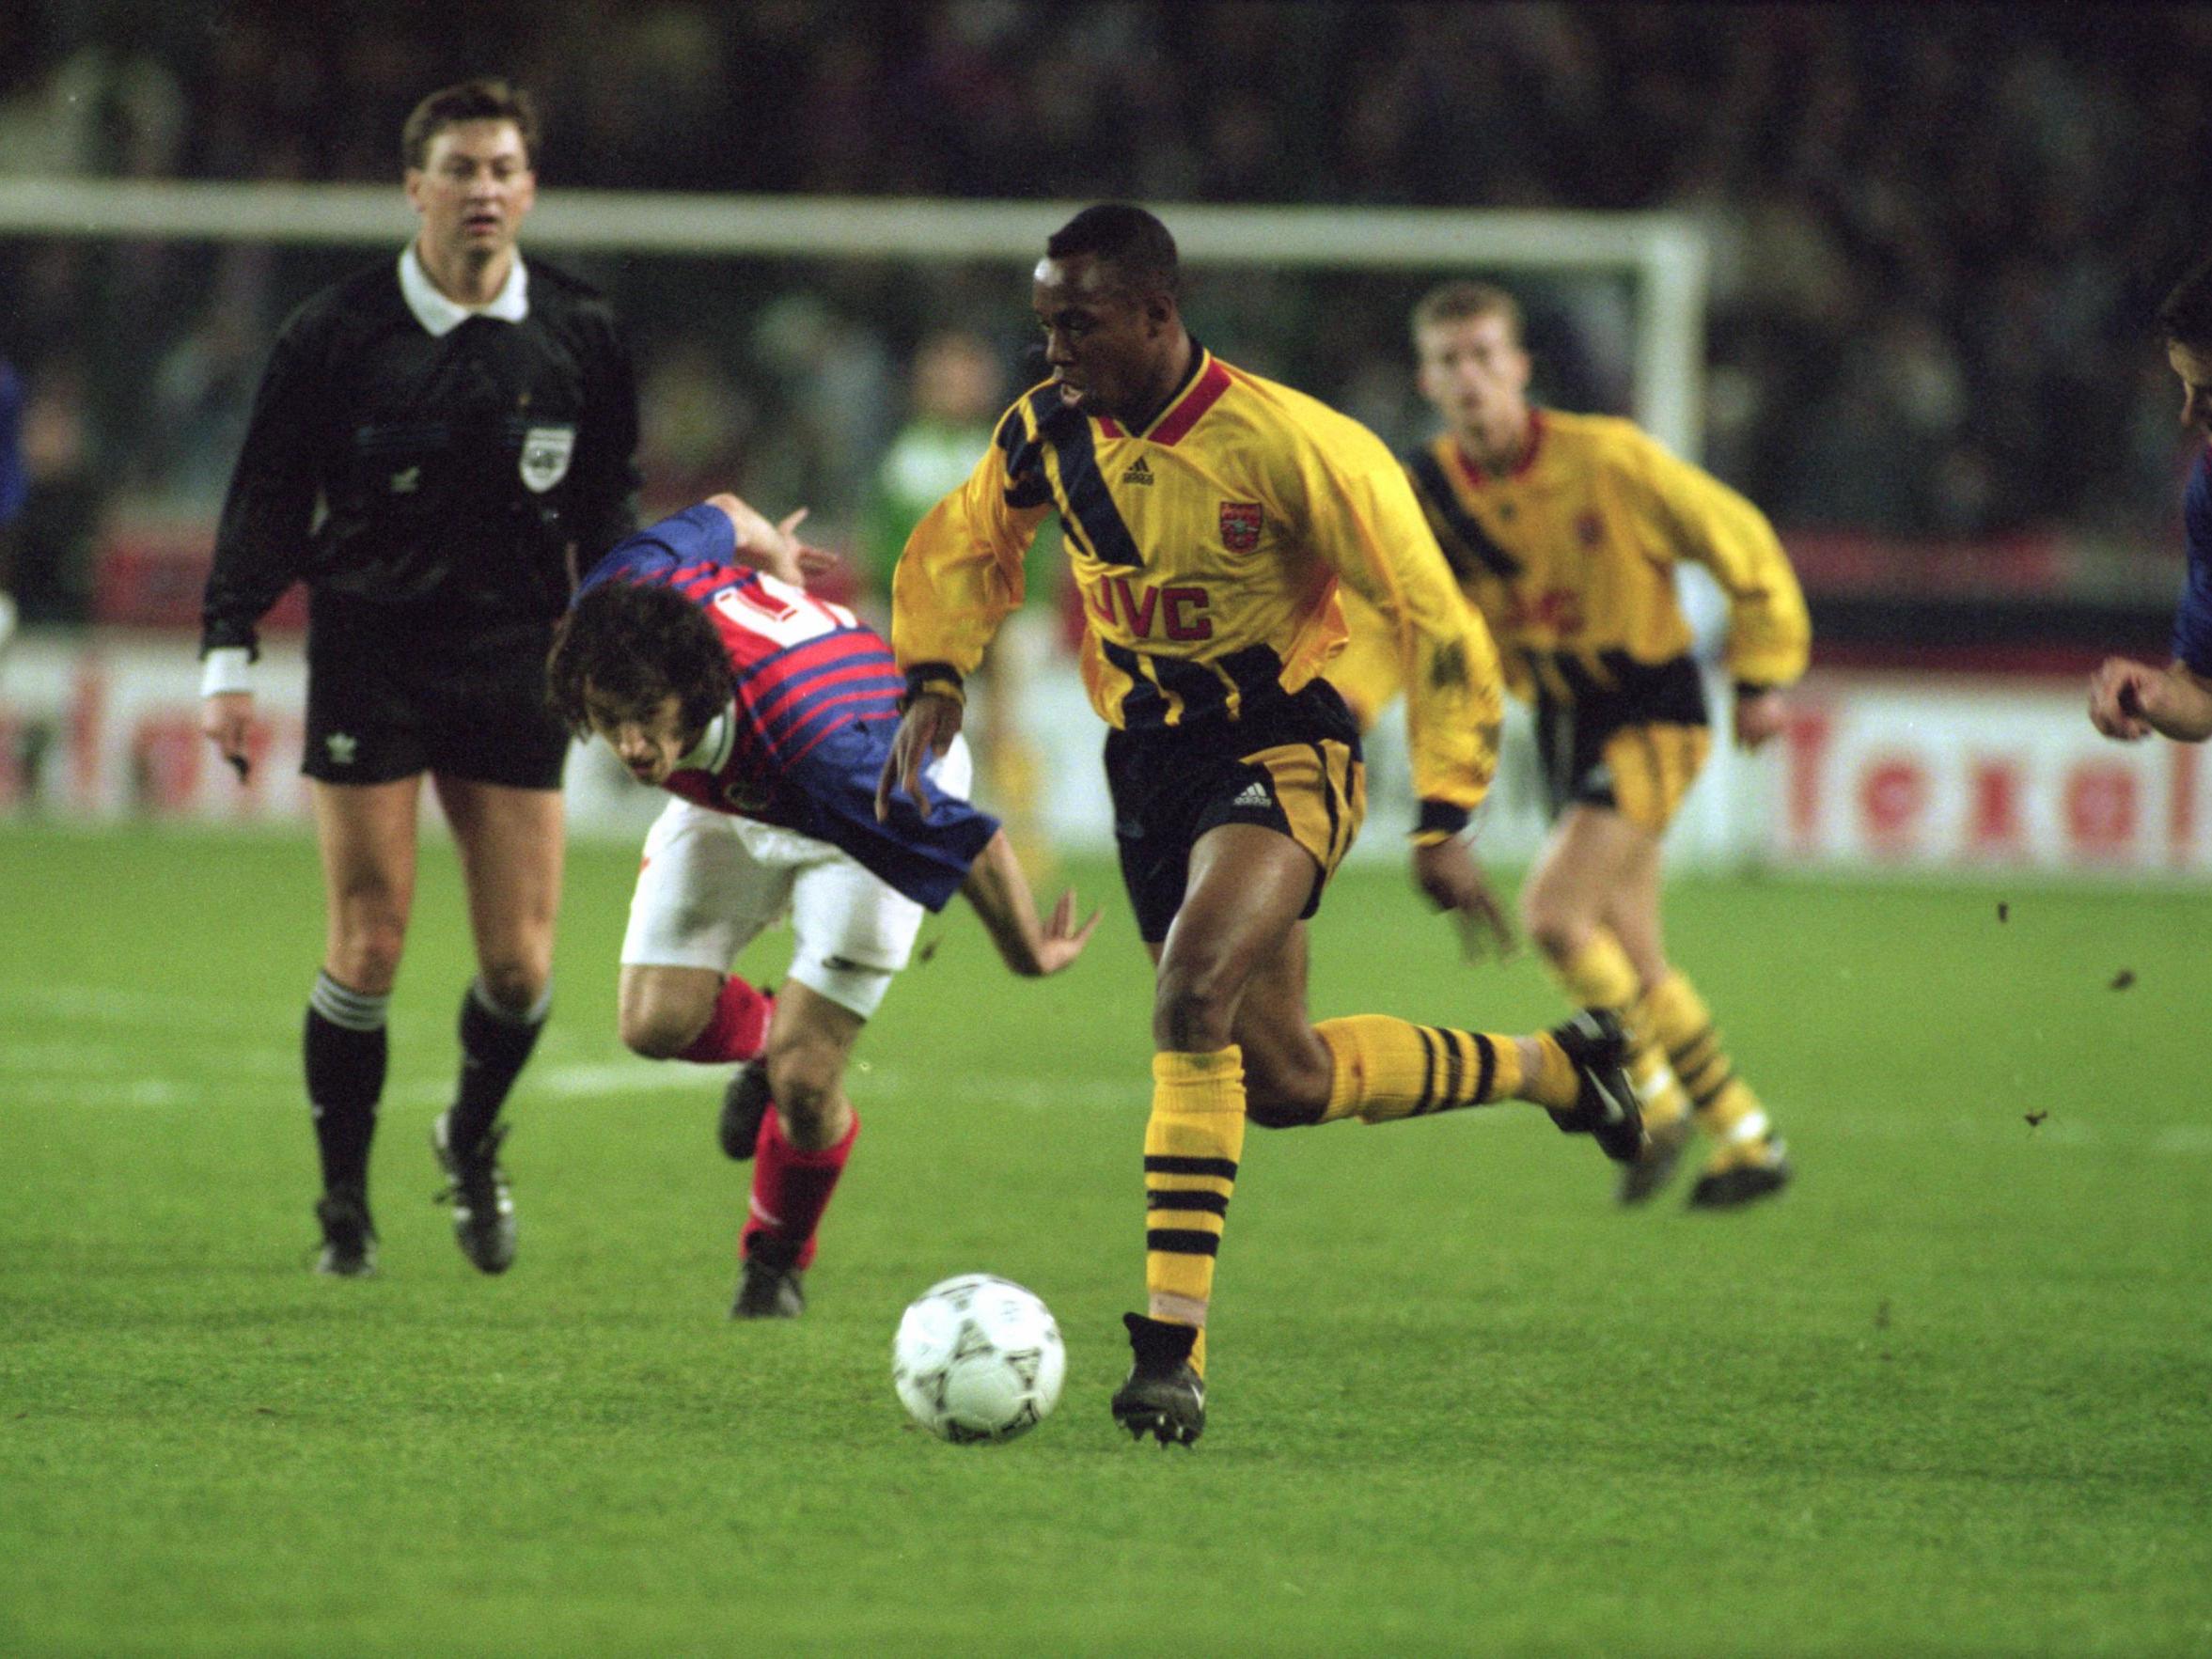 Ian Wright joined Arsenal in 1991 after six years at Crystal Palace